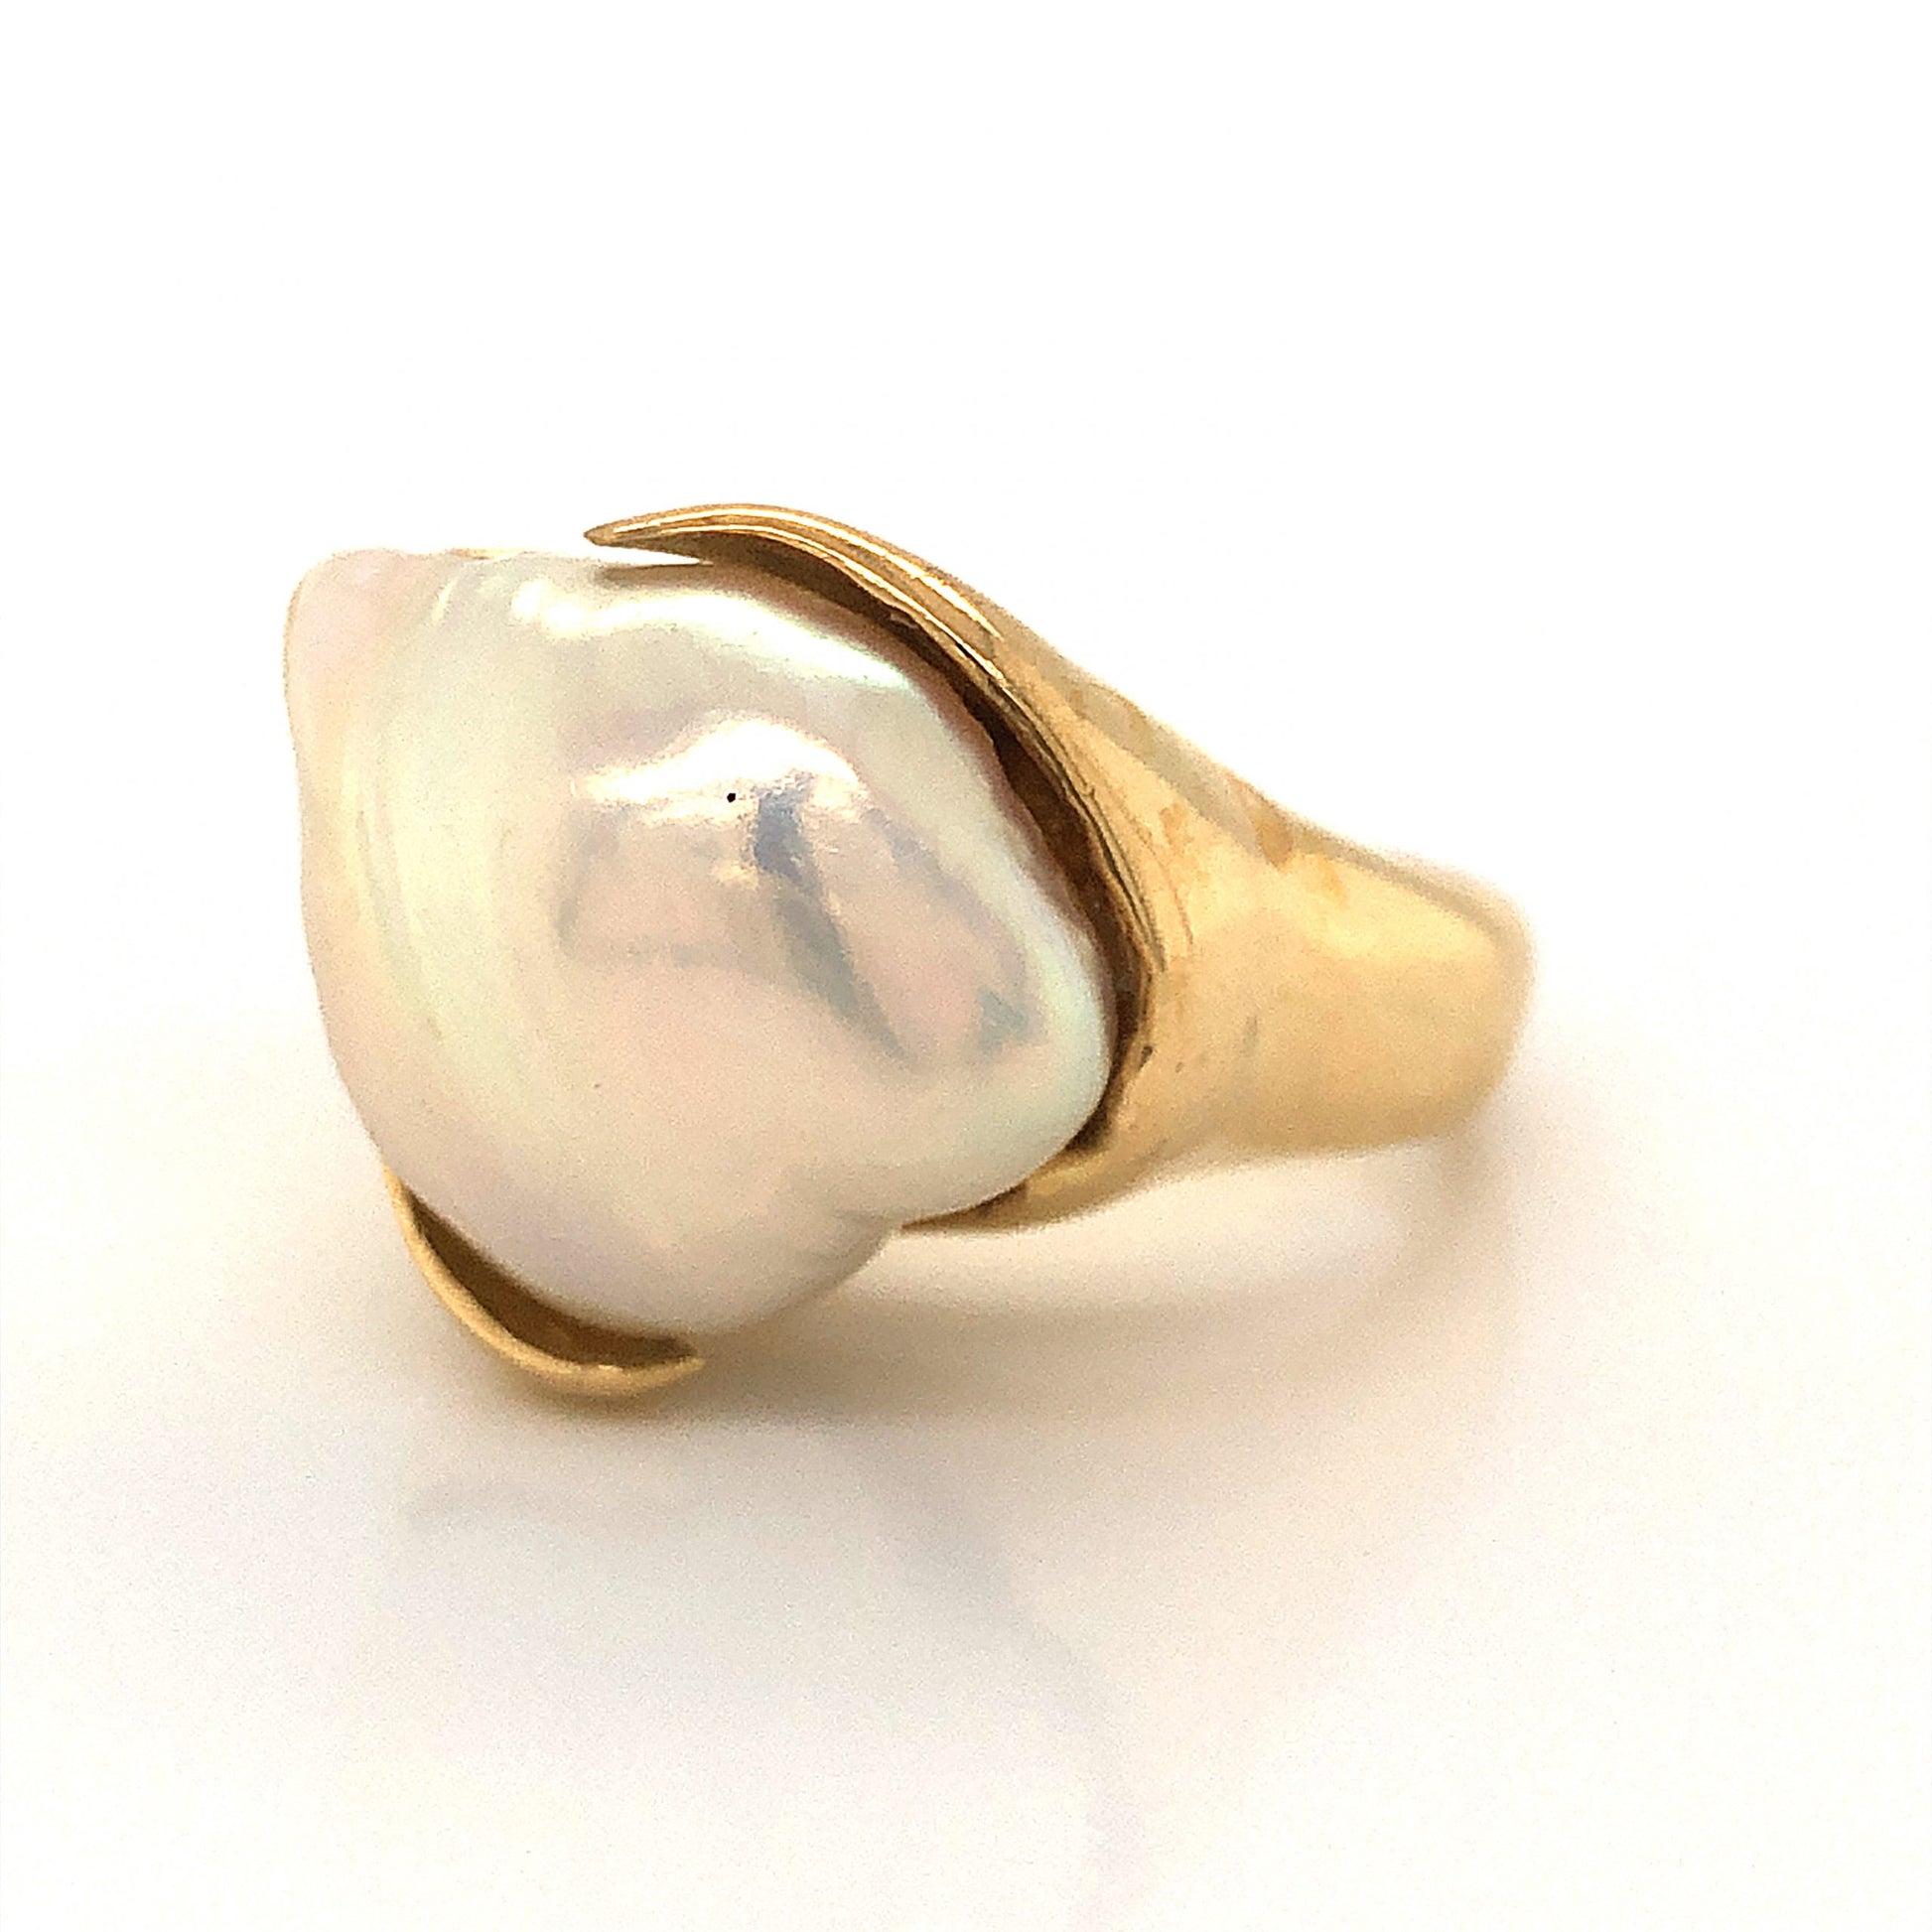 Baroque Pearl Cocktail Ring 18k Yellow GoldComposition: 18 Karat Yellow Gold Ring Size: 6.75 Total Gram Weight: 19.9 g Inscription: 18k
      